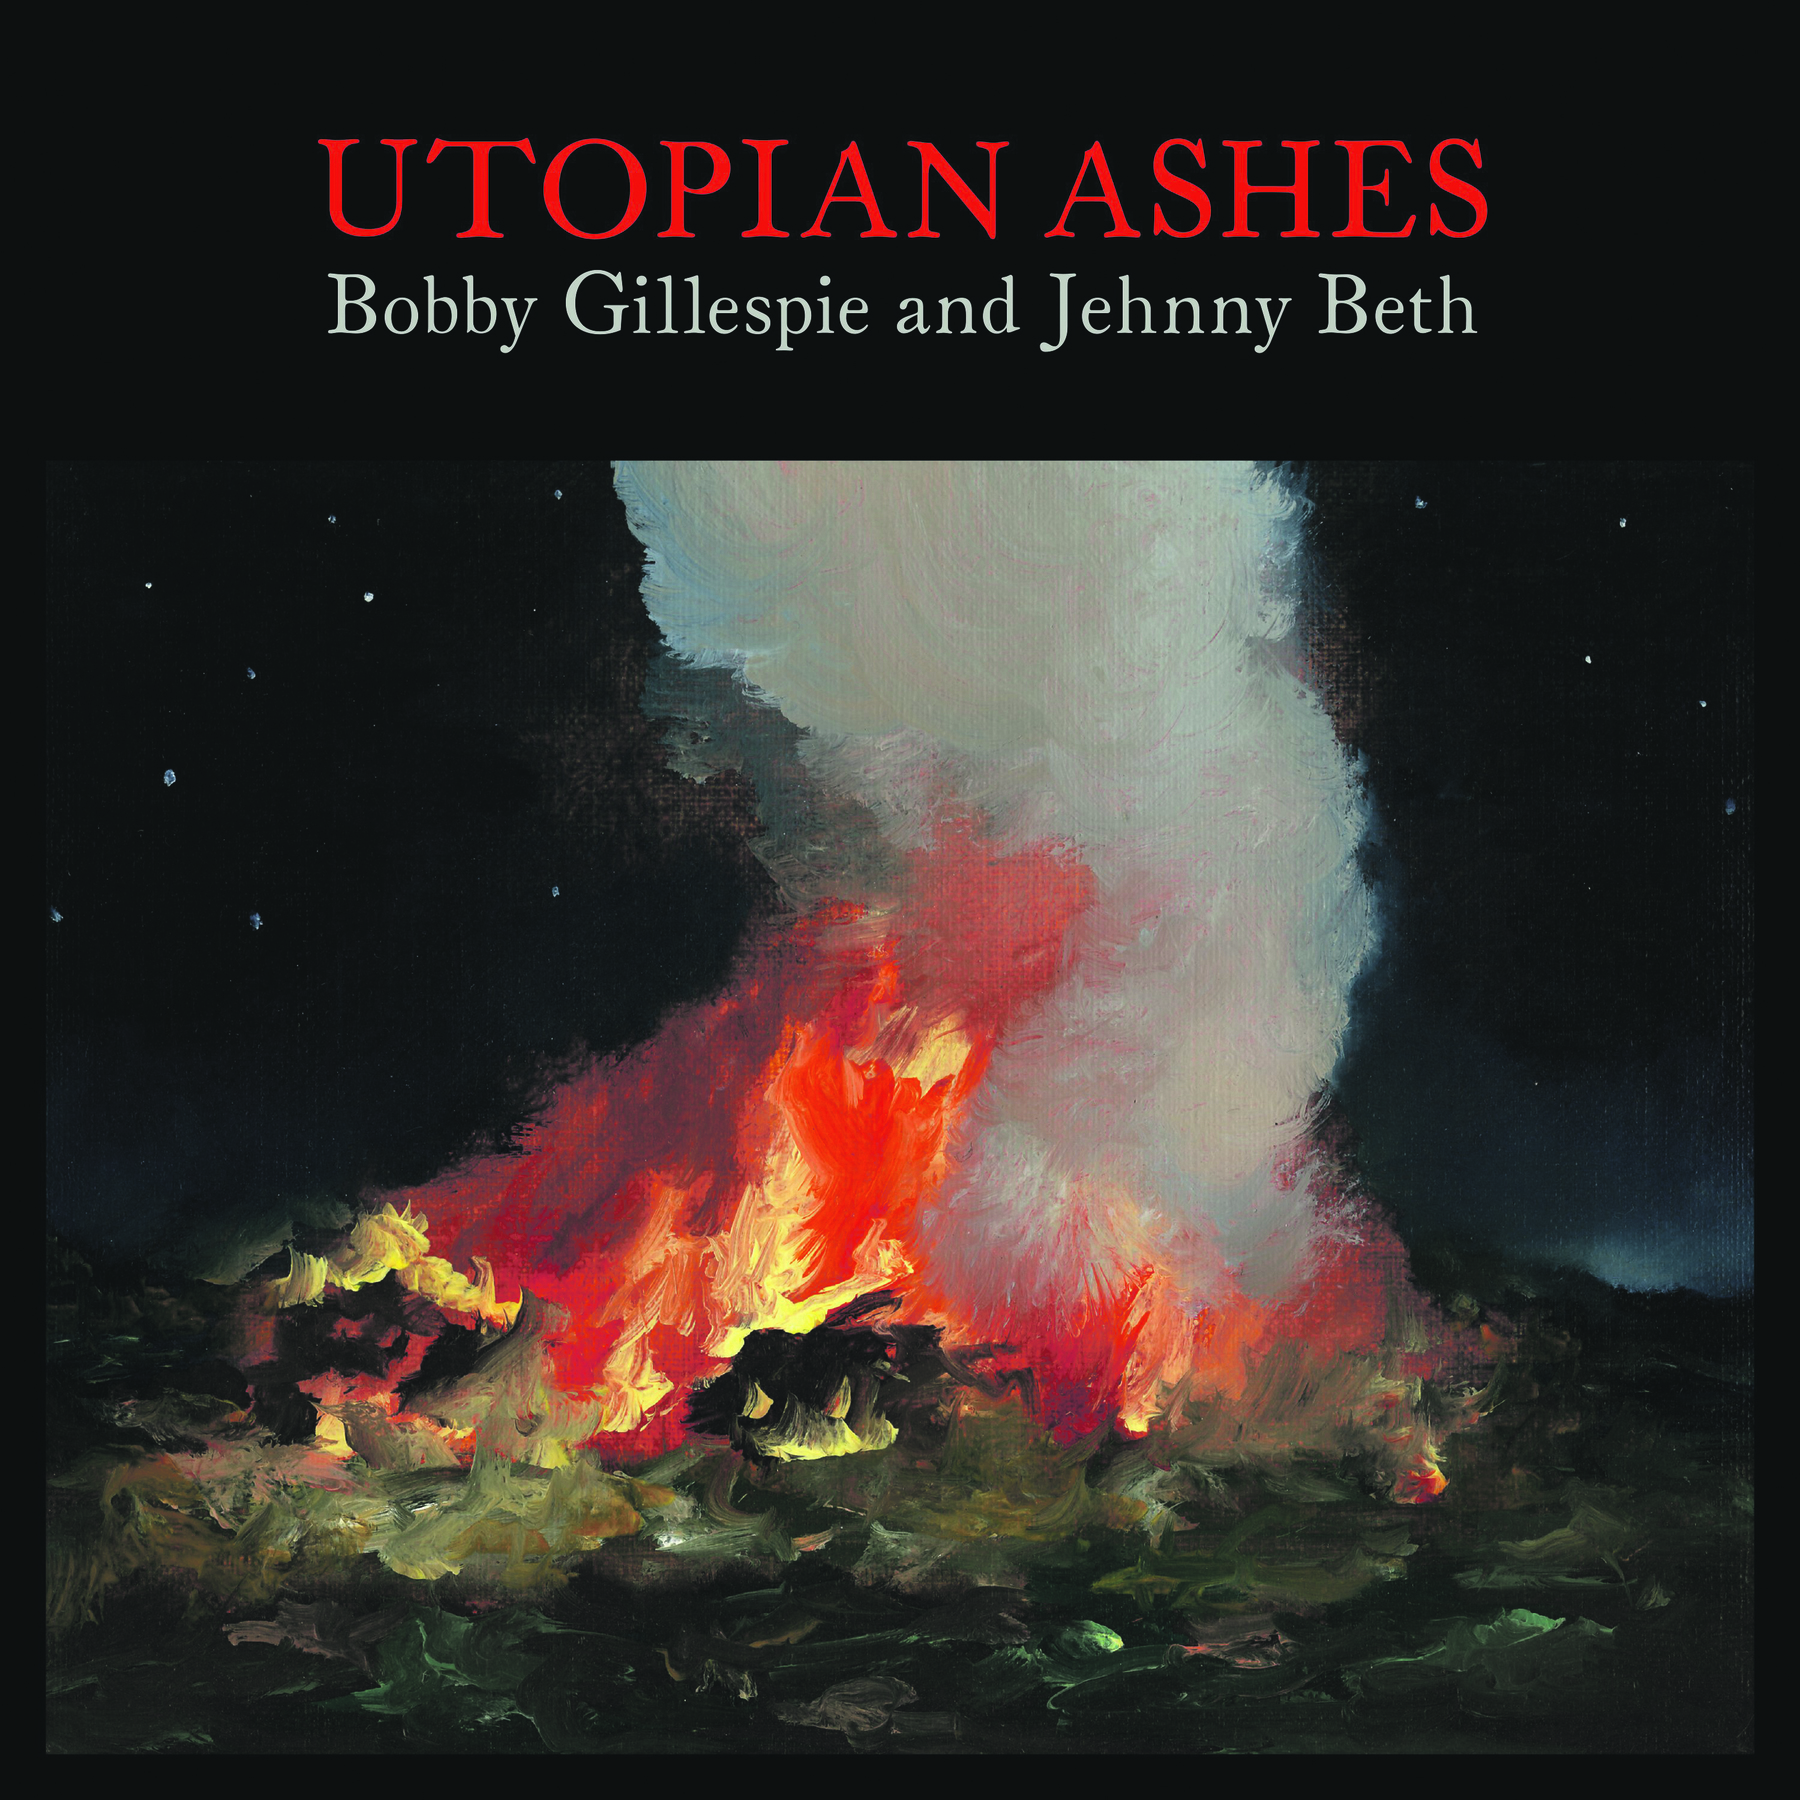 Bobby Gillespie and Jehnny Beth  39Utopian Ashes39 review